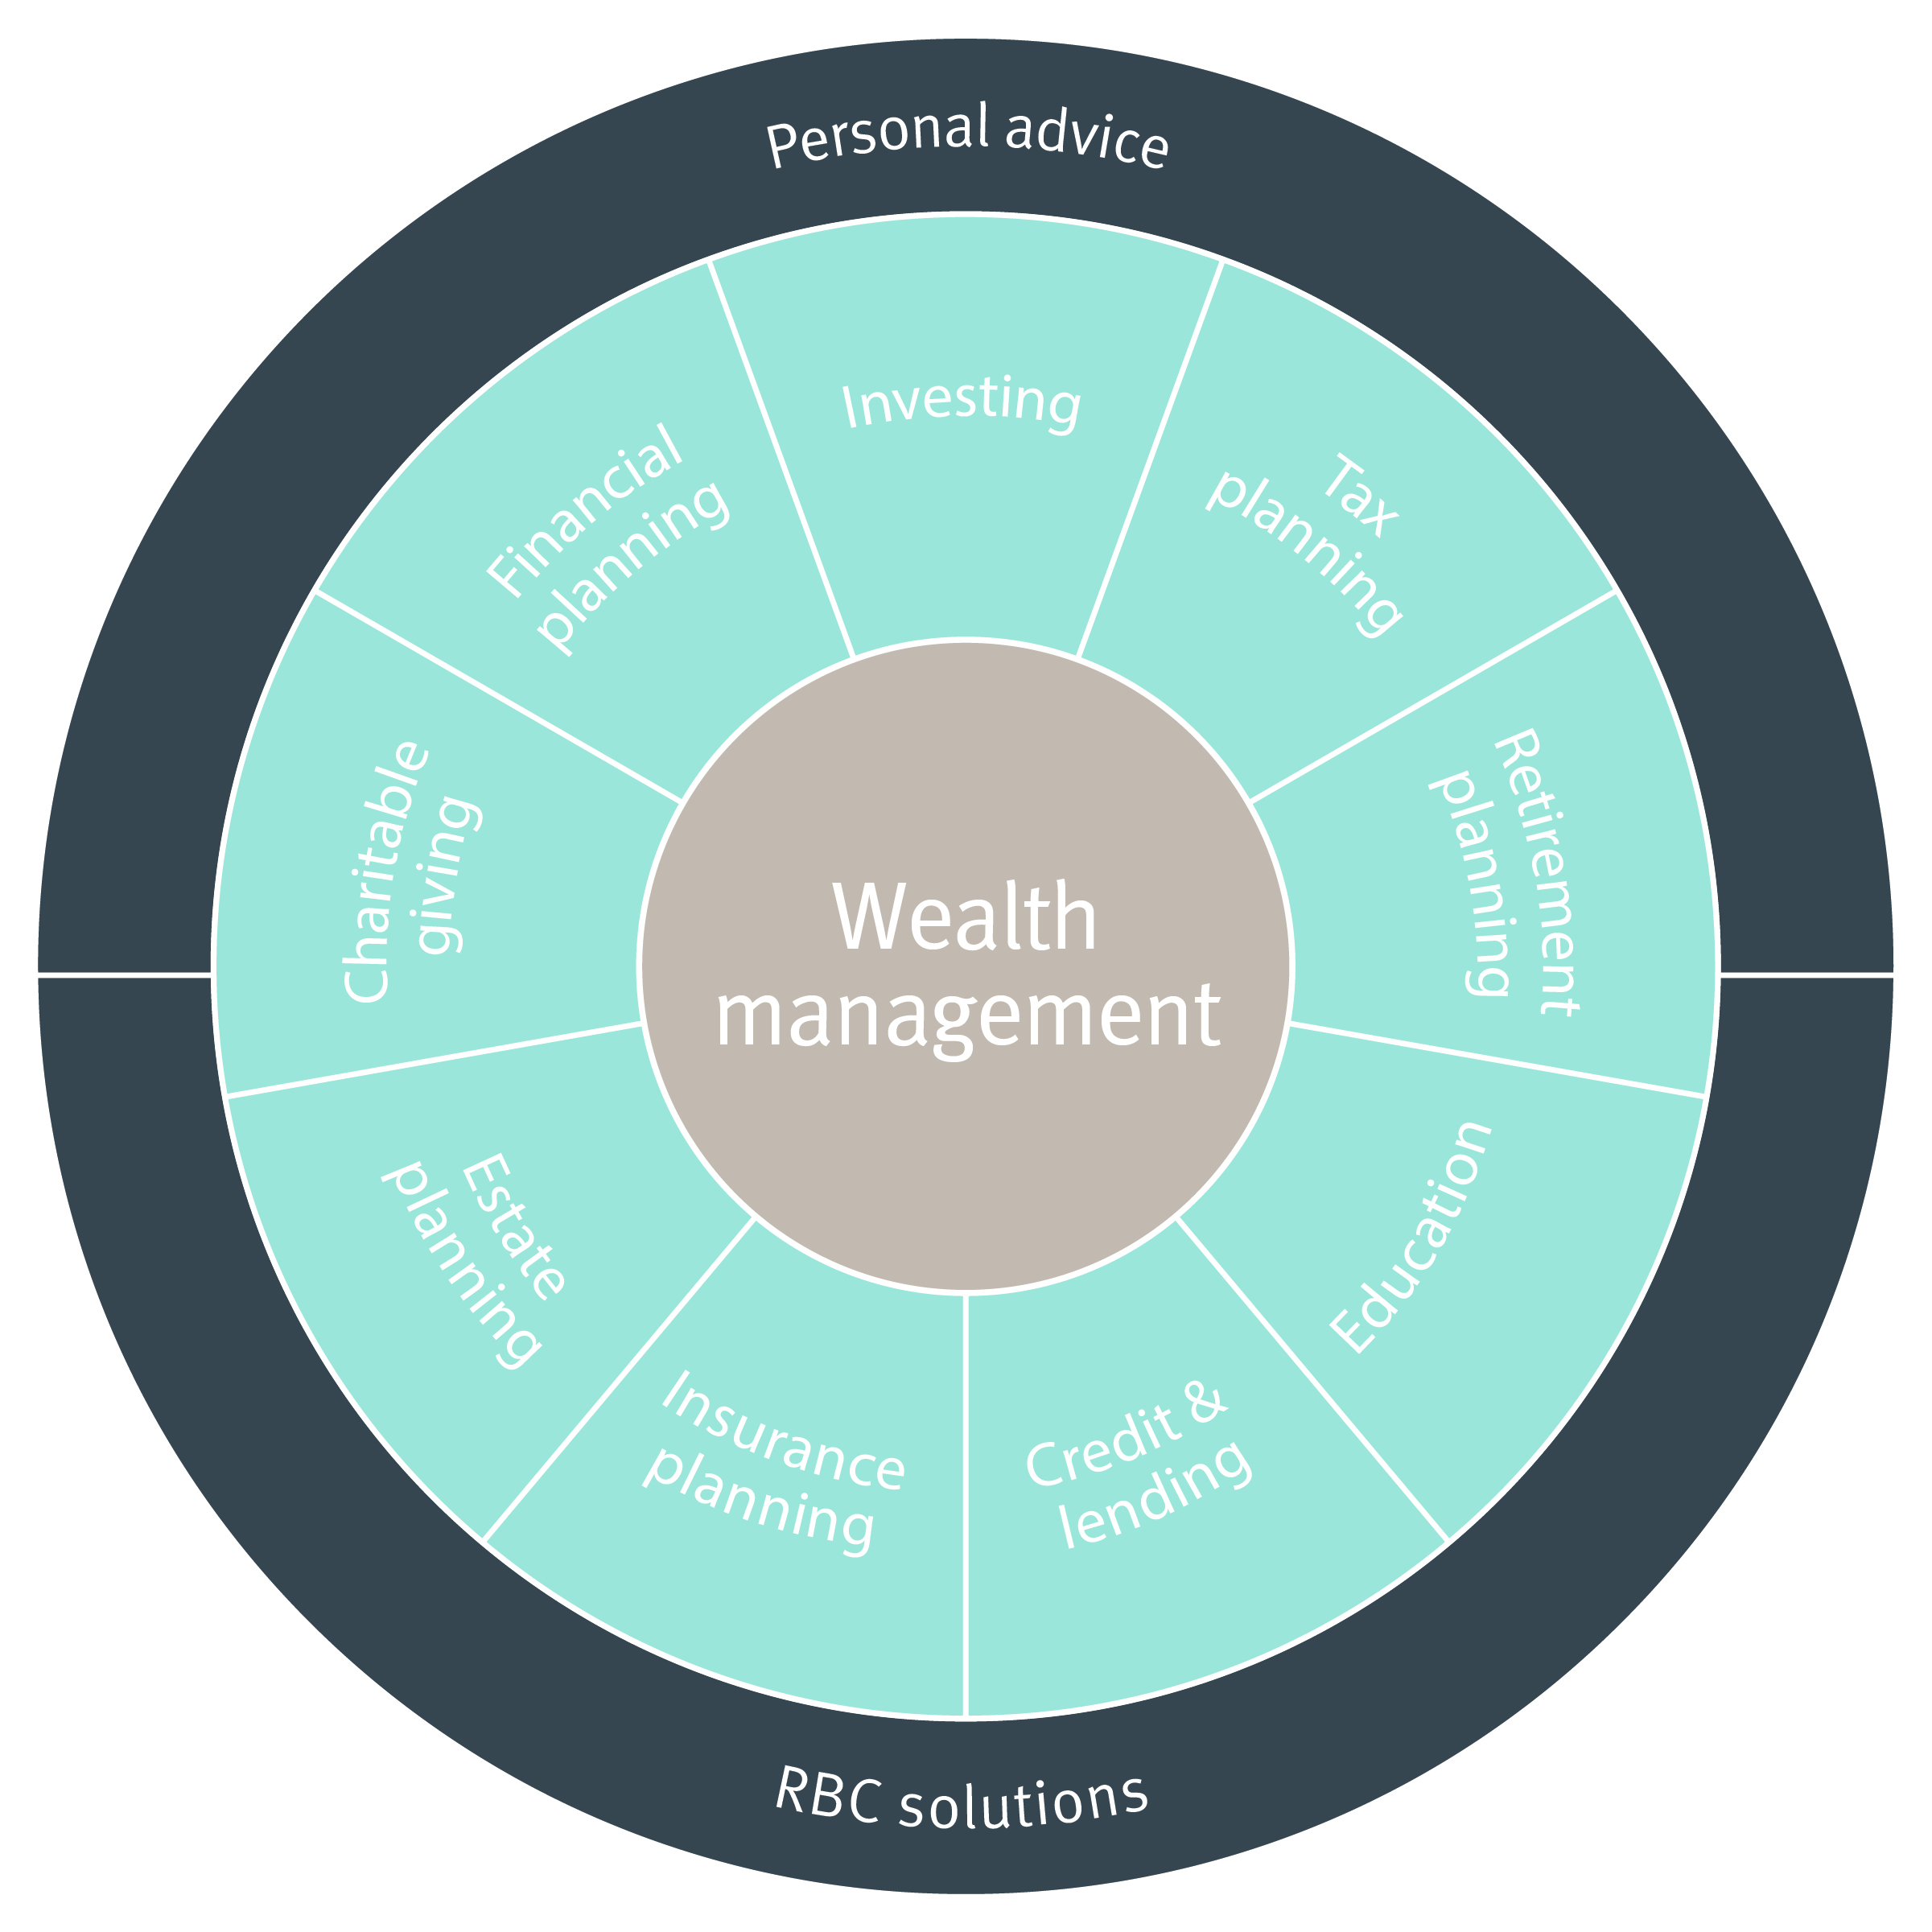 MPCD Wealth Management solutions wheel